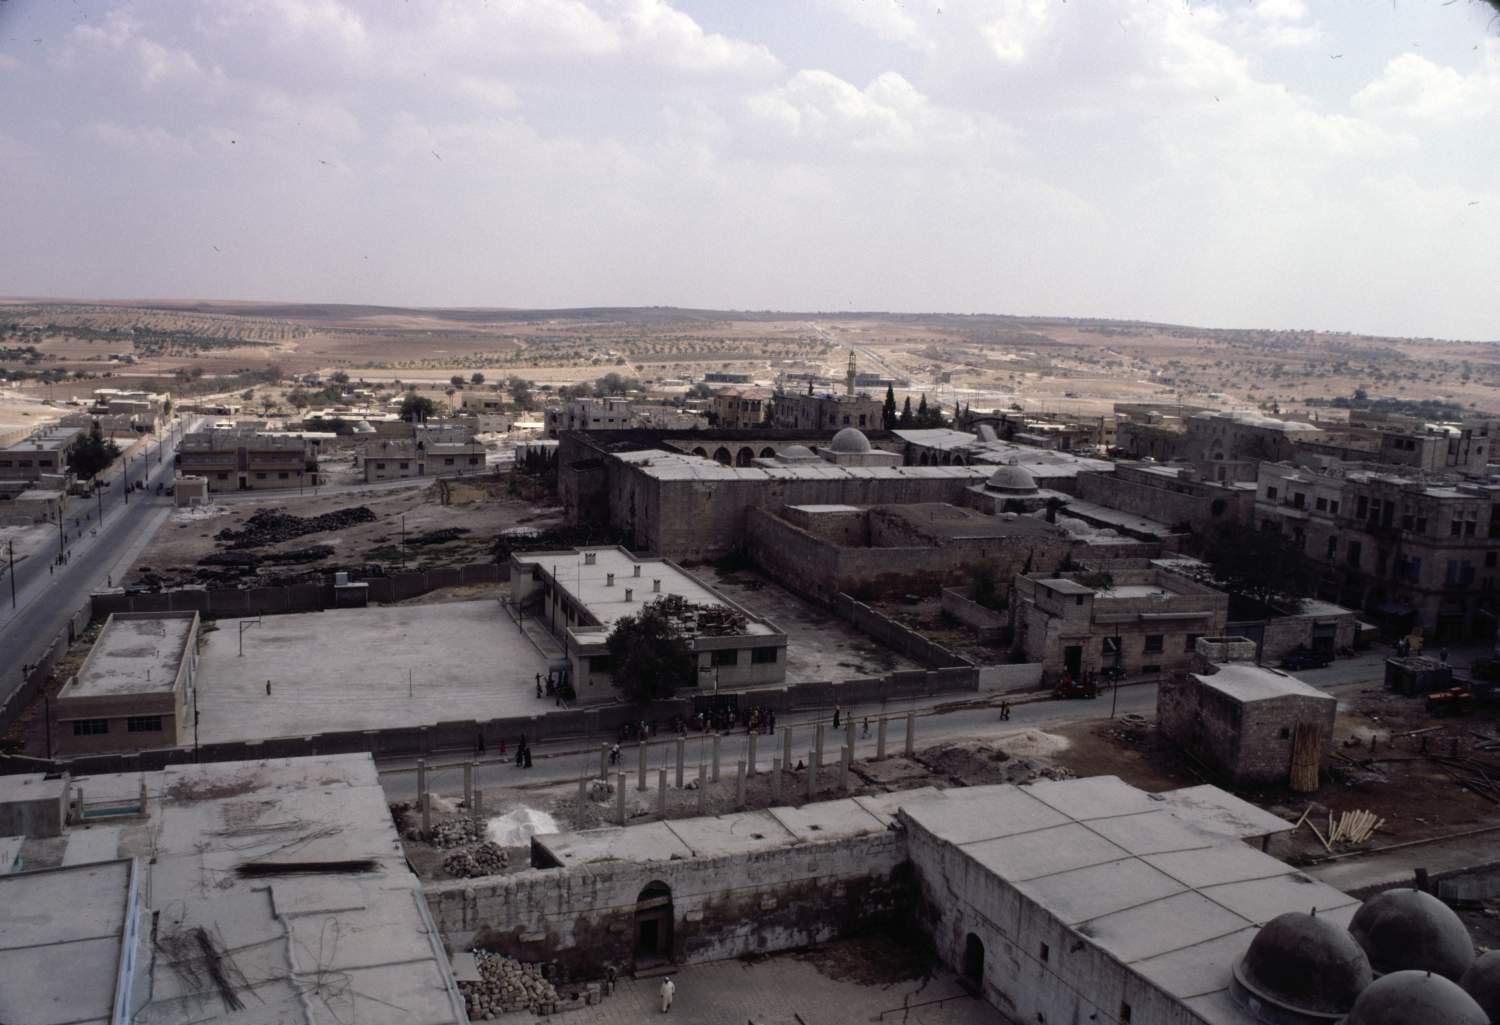 General view of Ma'arrat al-Na'aman from Great Mosque minaret, facing east. The east end of the mosque's courtyard is visible in foreground.